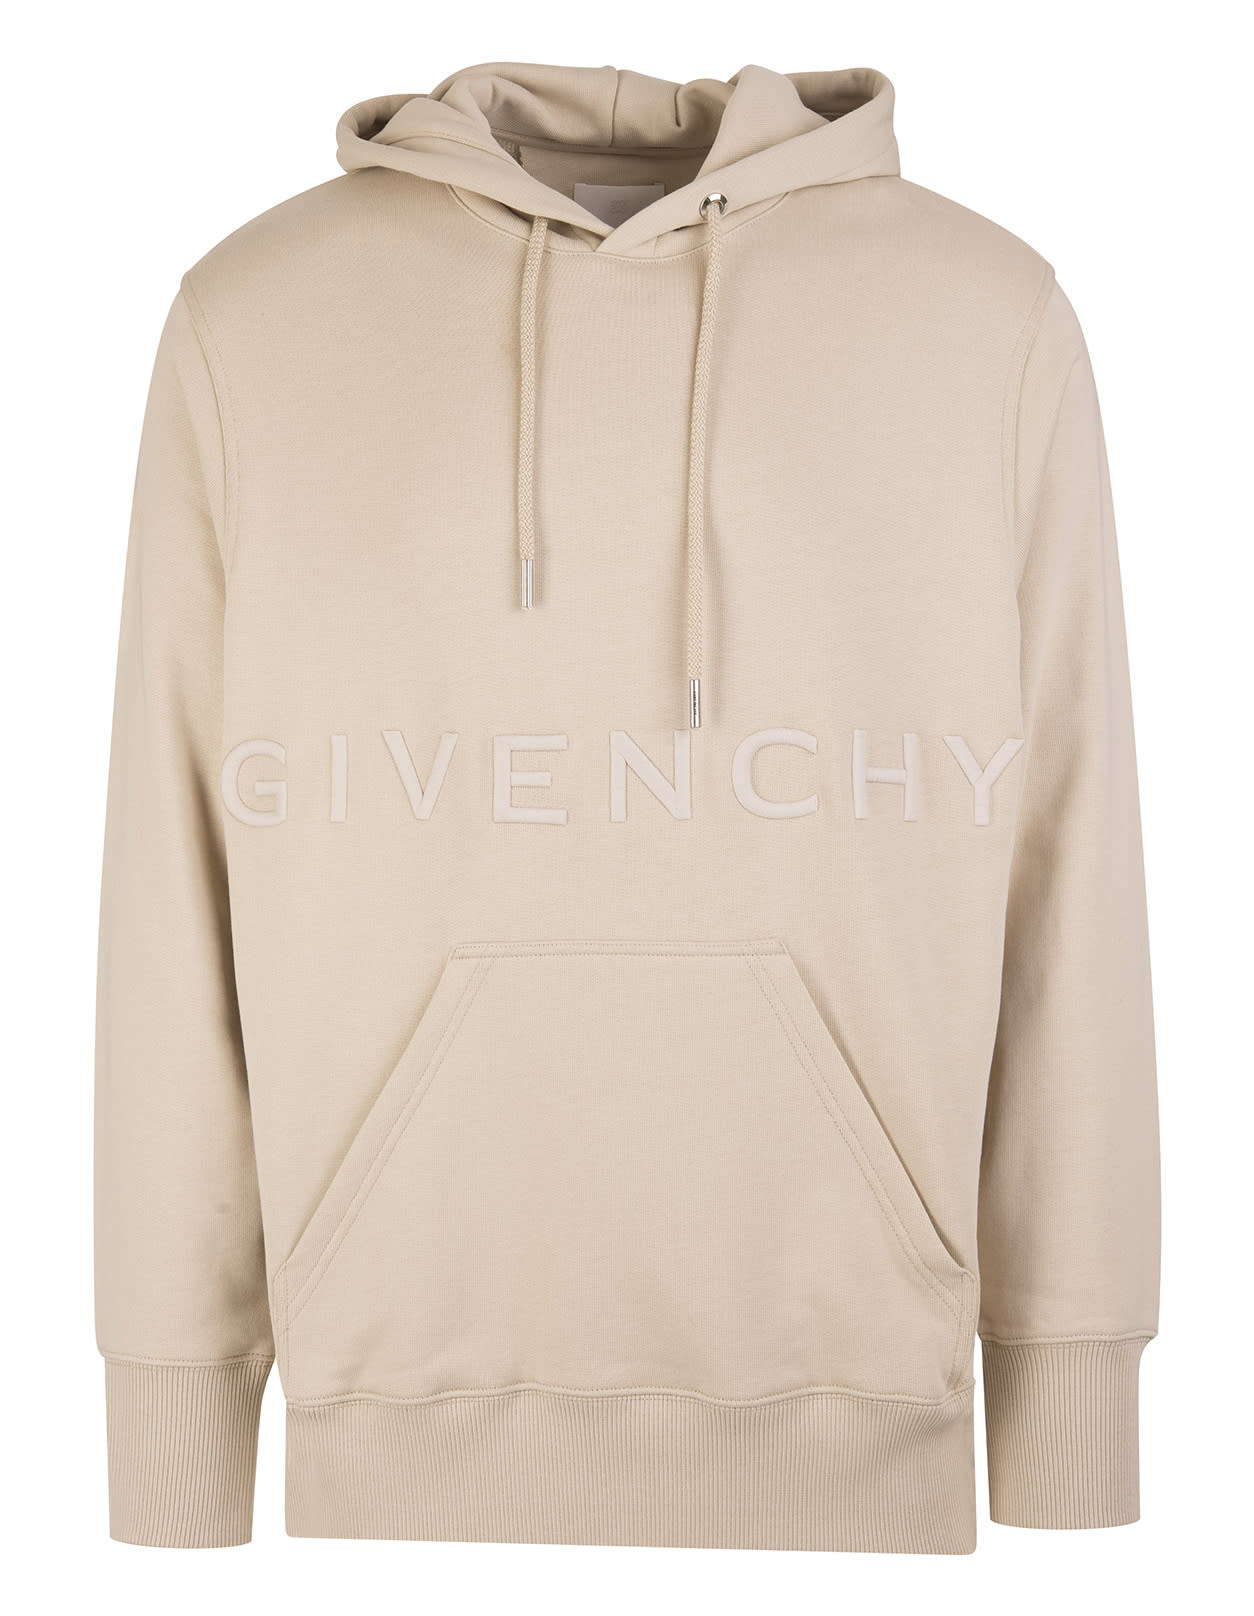 Man Beige Hoodie With Givenchy 4g Embroidery